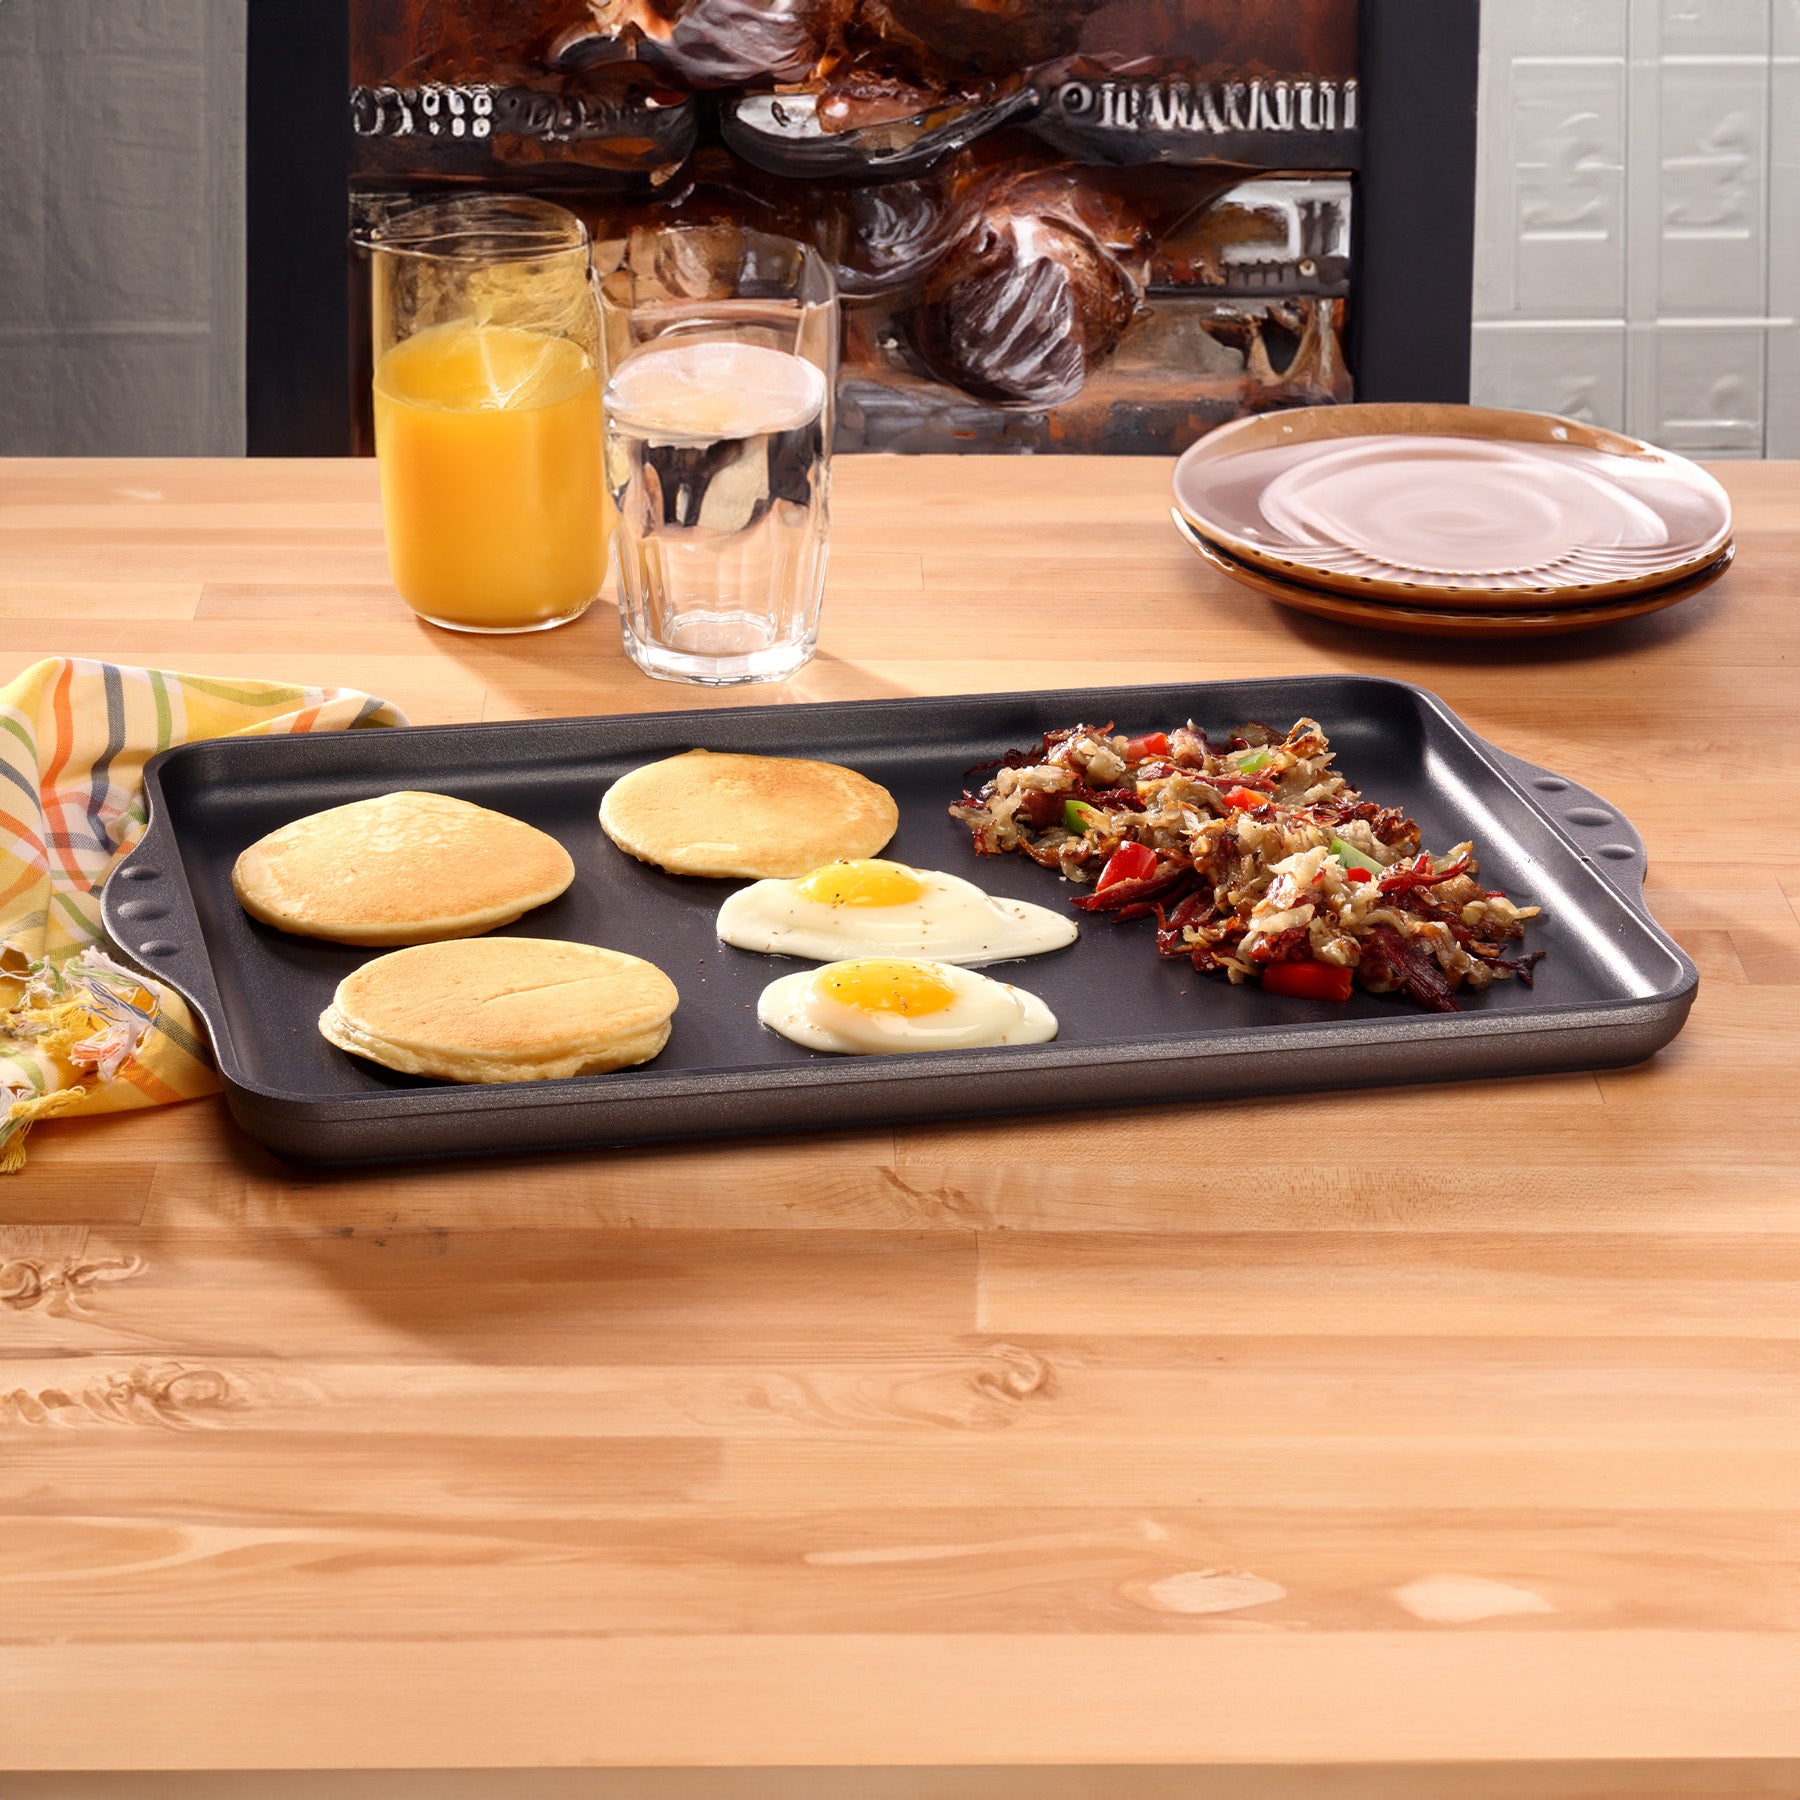 HD Nonstick 17" x 11" Double-Burner Griddle in use on wooden table